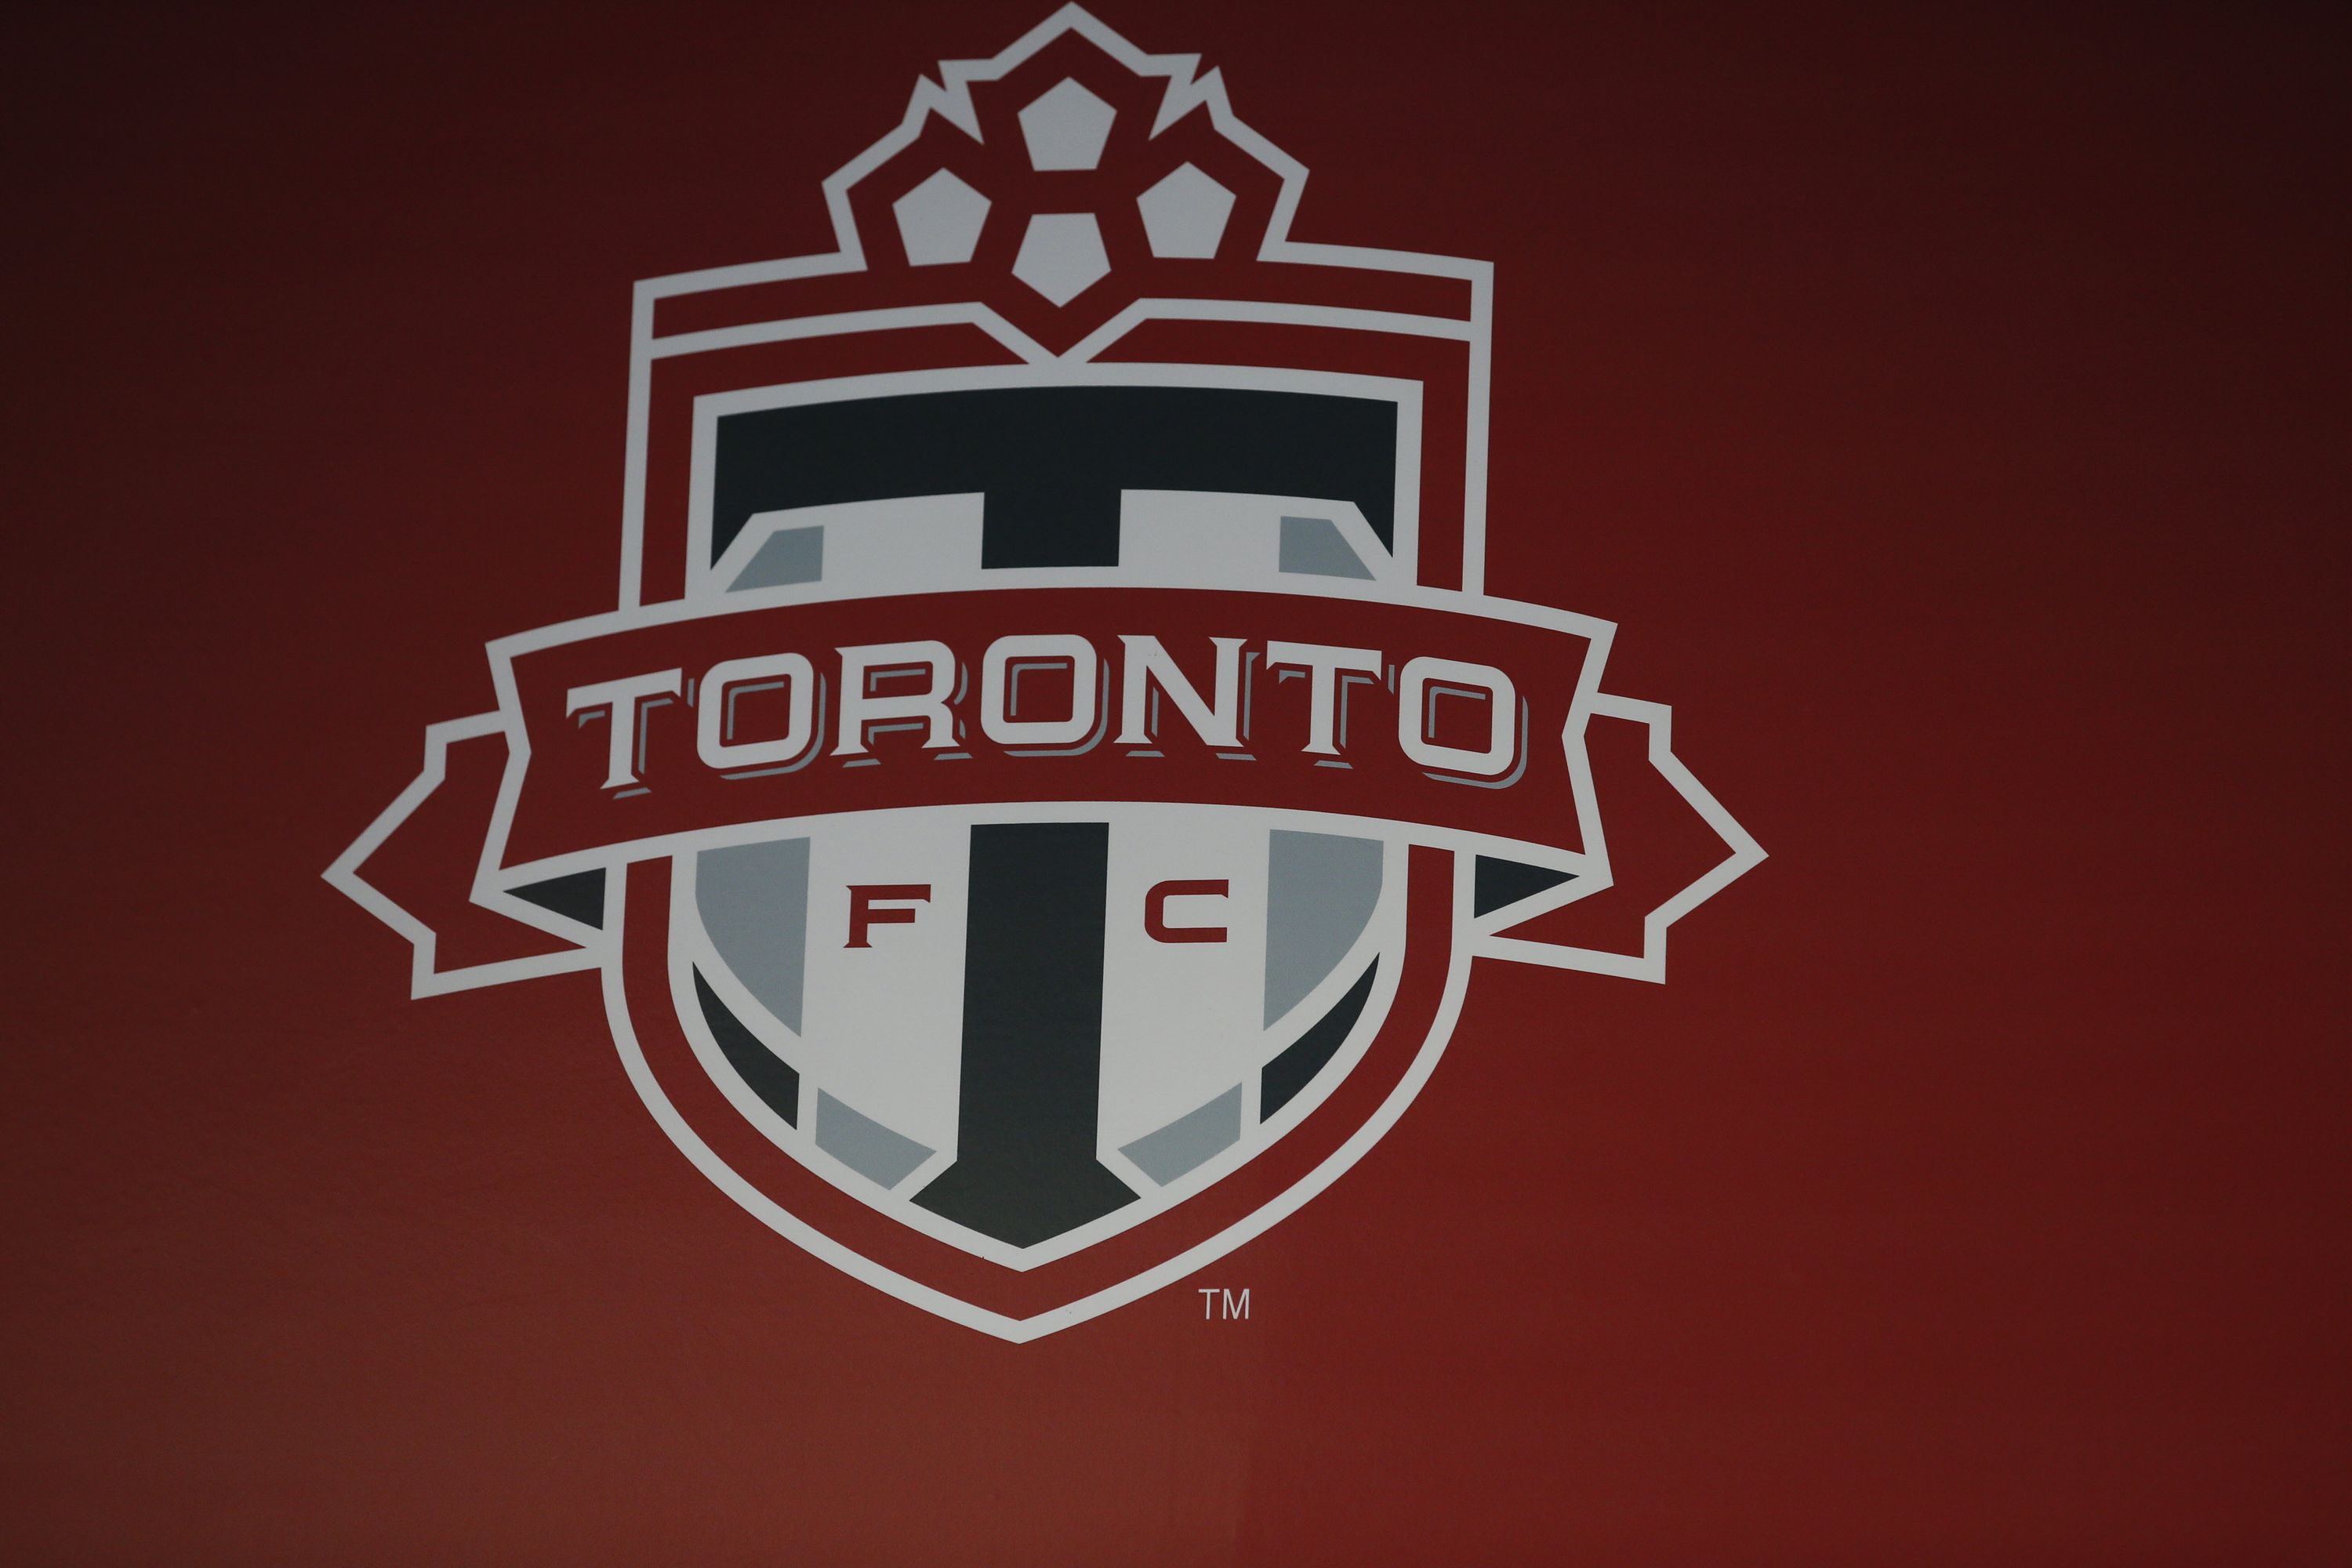 Member of TFC travel party comes down with symptoms, postponing flight to Florida again